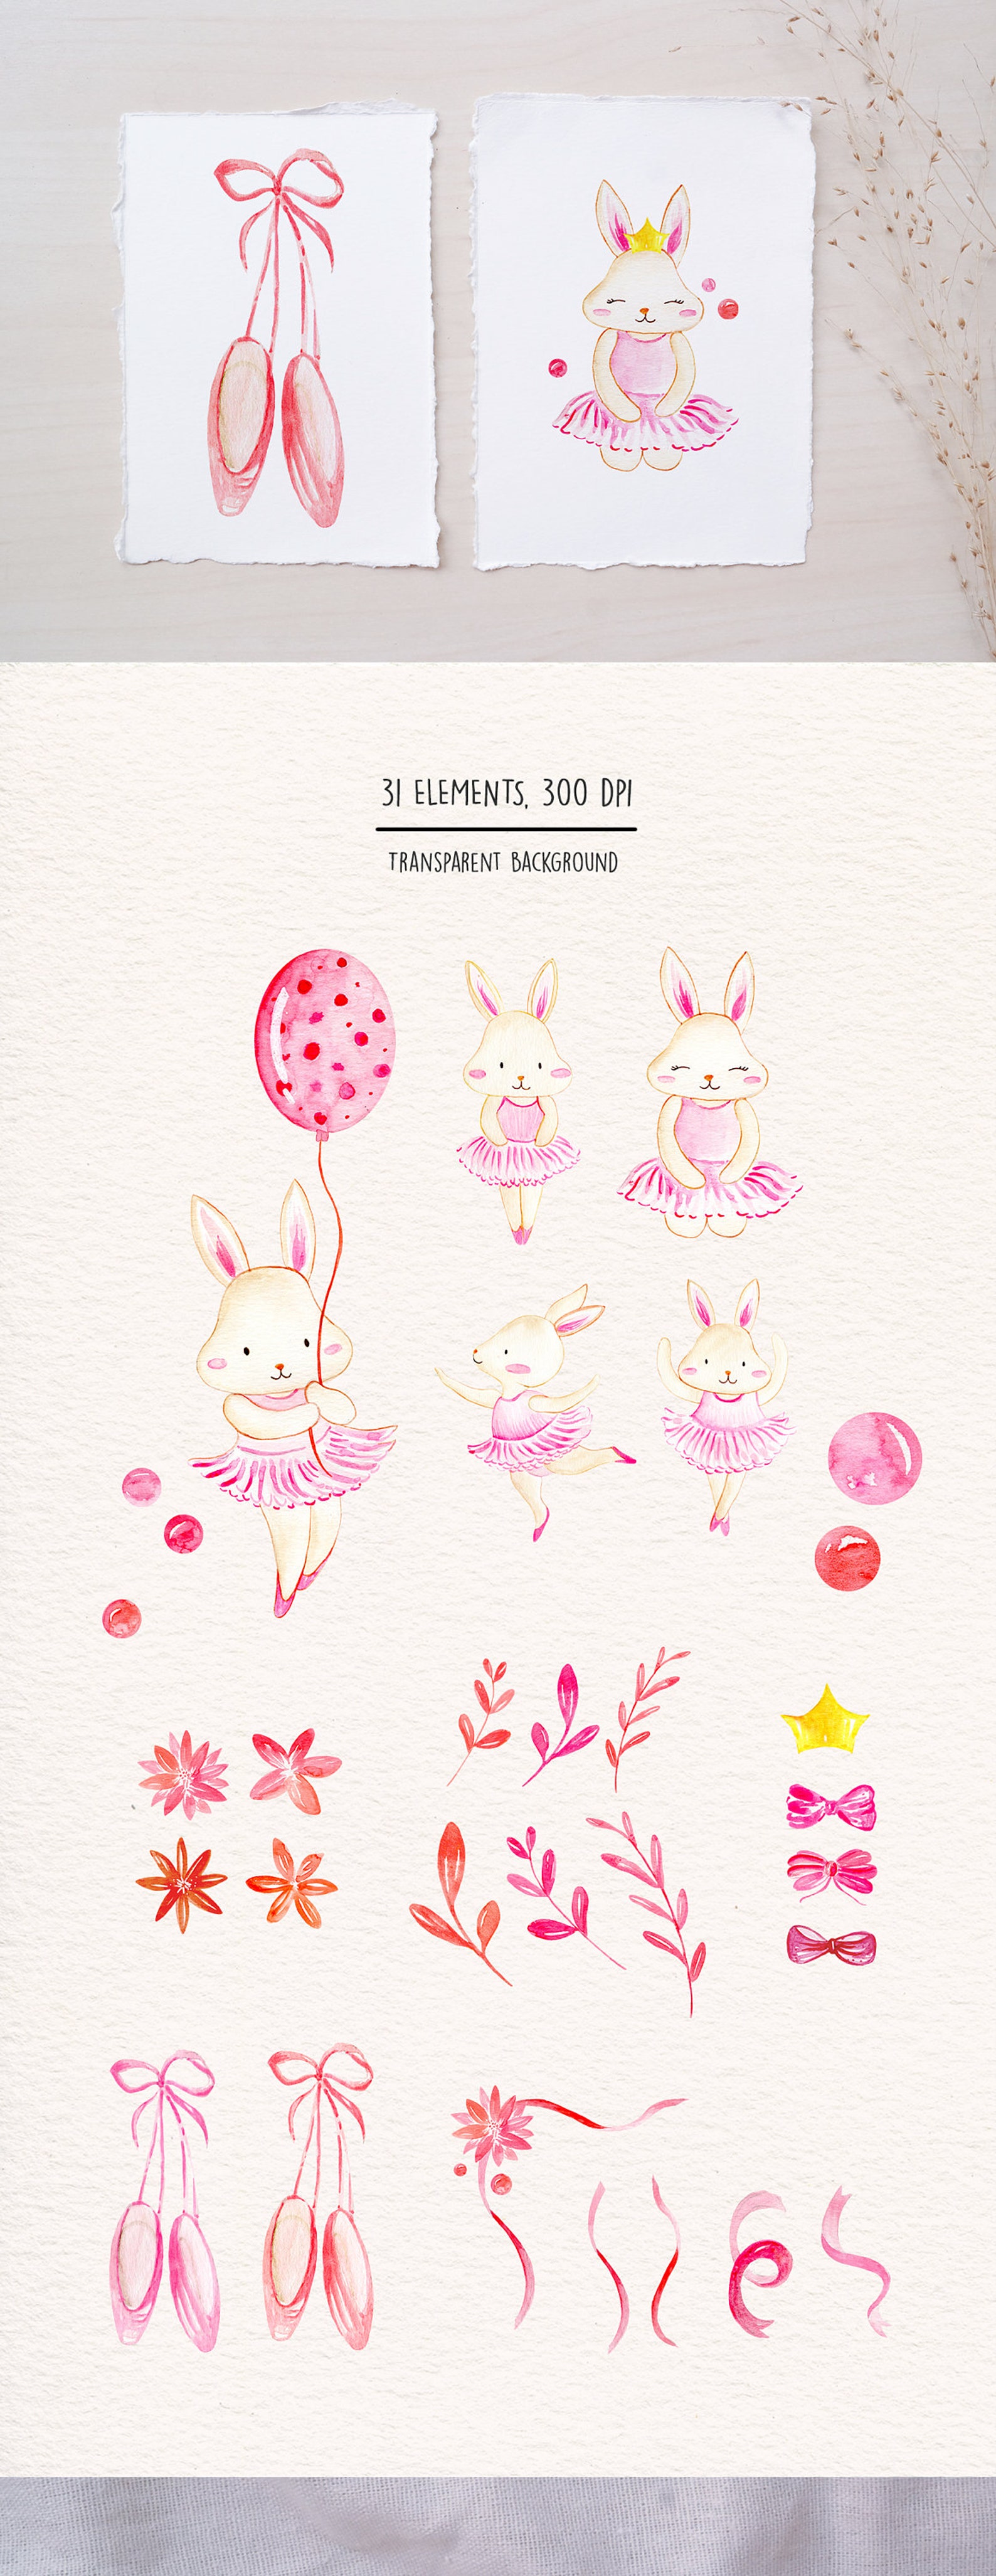 watercolor ballerina bunny for pink ballet dance themed project,